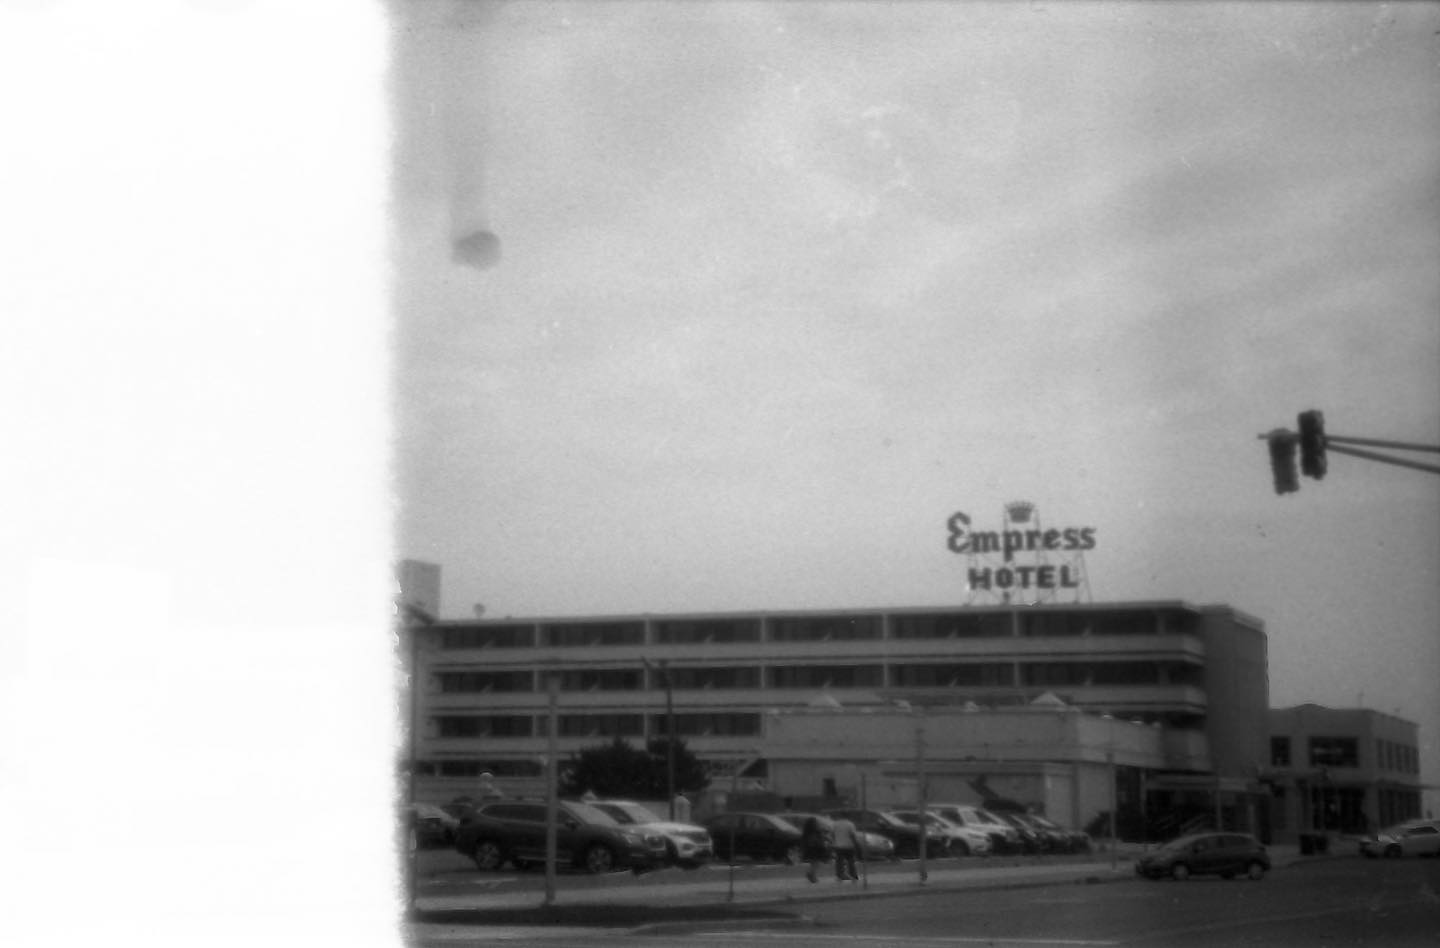 Empress Hotel

Shot in Asbury Park with my #contaxiiia on @kodak Eastman No. 10 #film that expired in March, 1931 (yes, the film expired more than 90 years ago). Developed in #hc110, 45 ml of syrup to 450 ml of water, at 40 degrees Fahrenheit (5 degrees Celsius) for 9 minutes. 1/25 seconds at f/1.5. #filmphotography #staybrokeshootfilm #allthroughalenspodcast #fossilizedfilm